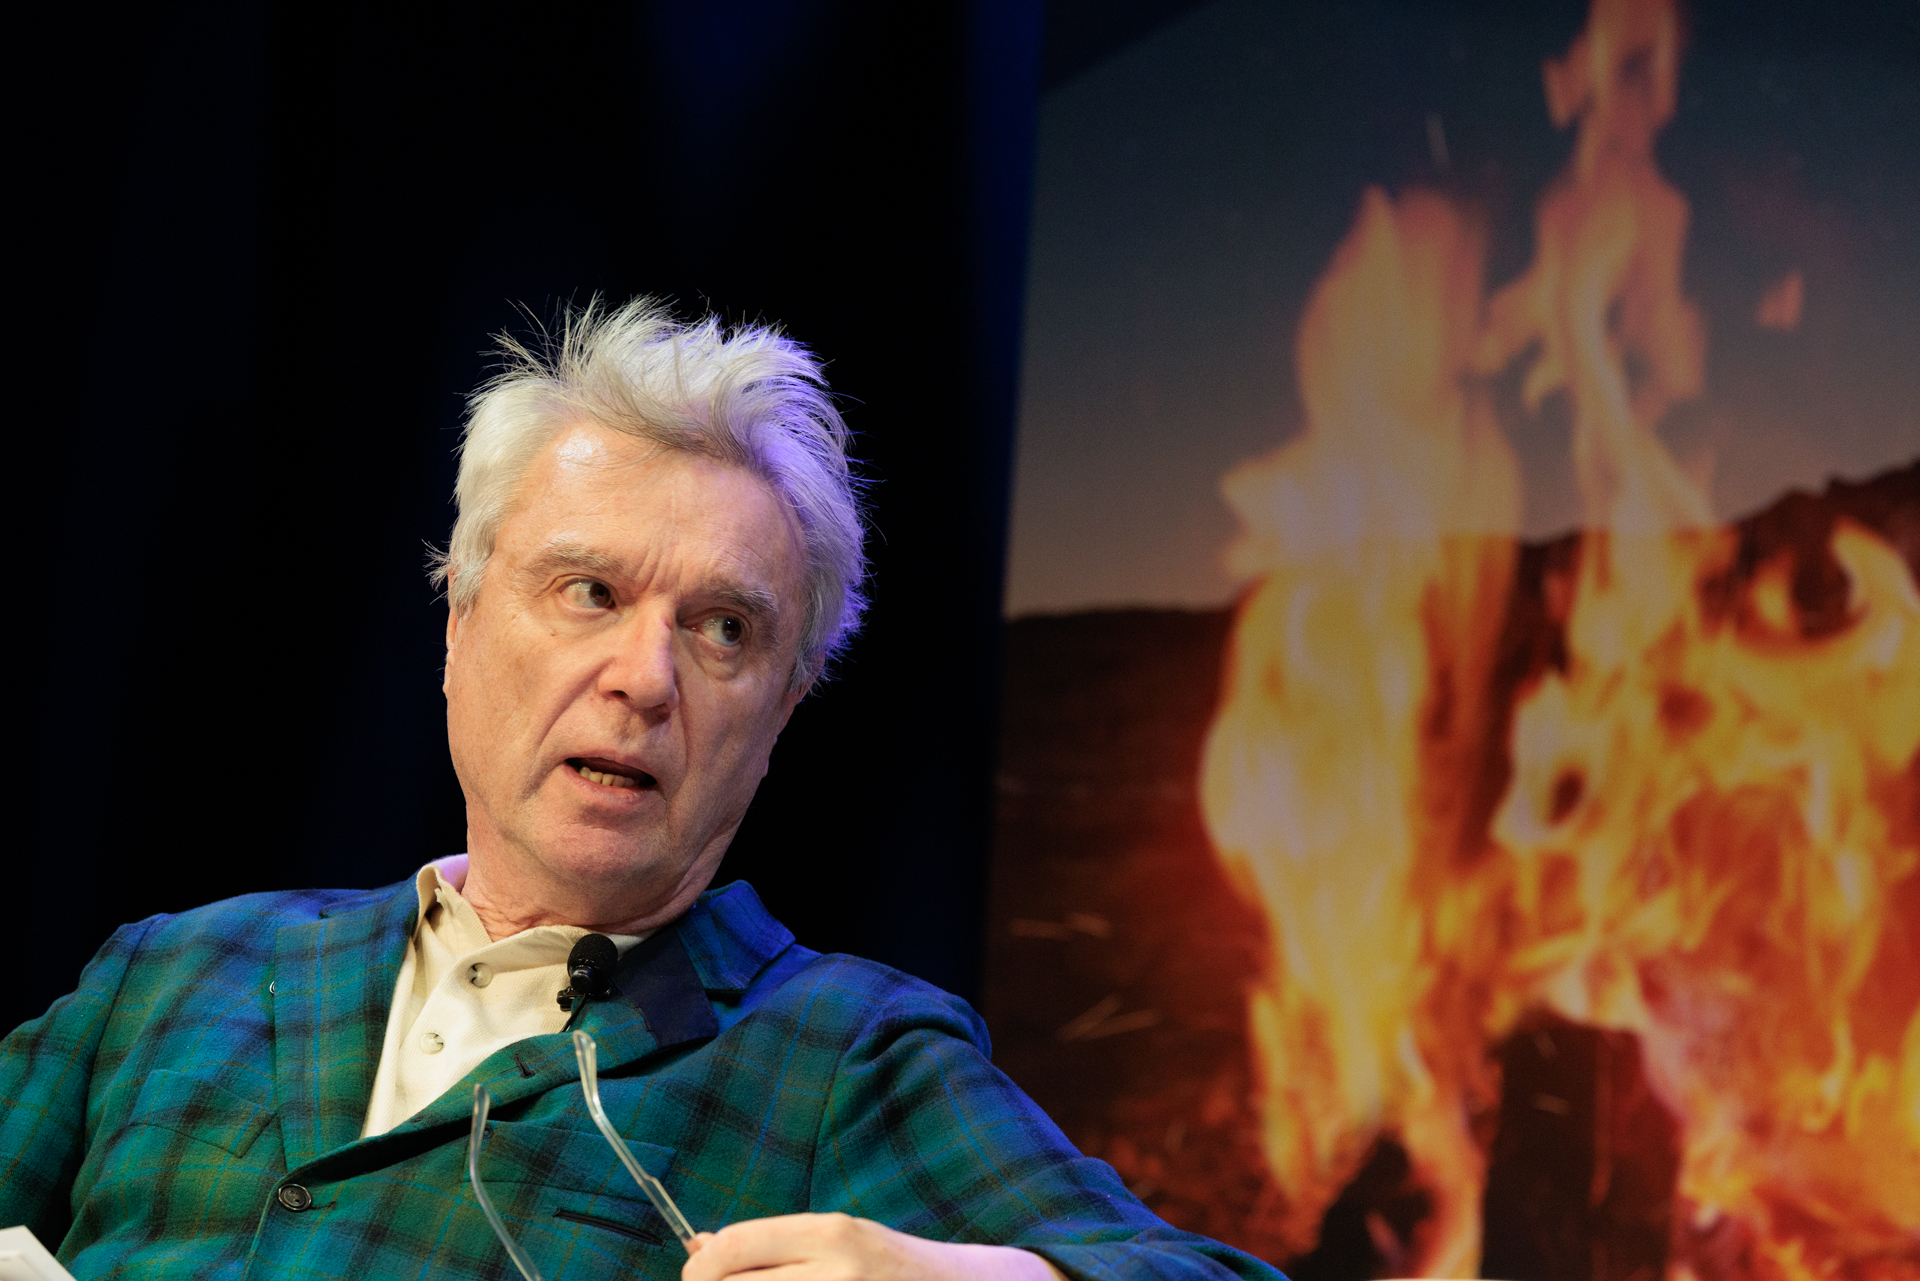 David Byrne, lead singer of the Talking Heads, discussed ecological storytelling and the power of the media. (William Atkins/GW Today)